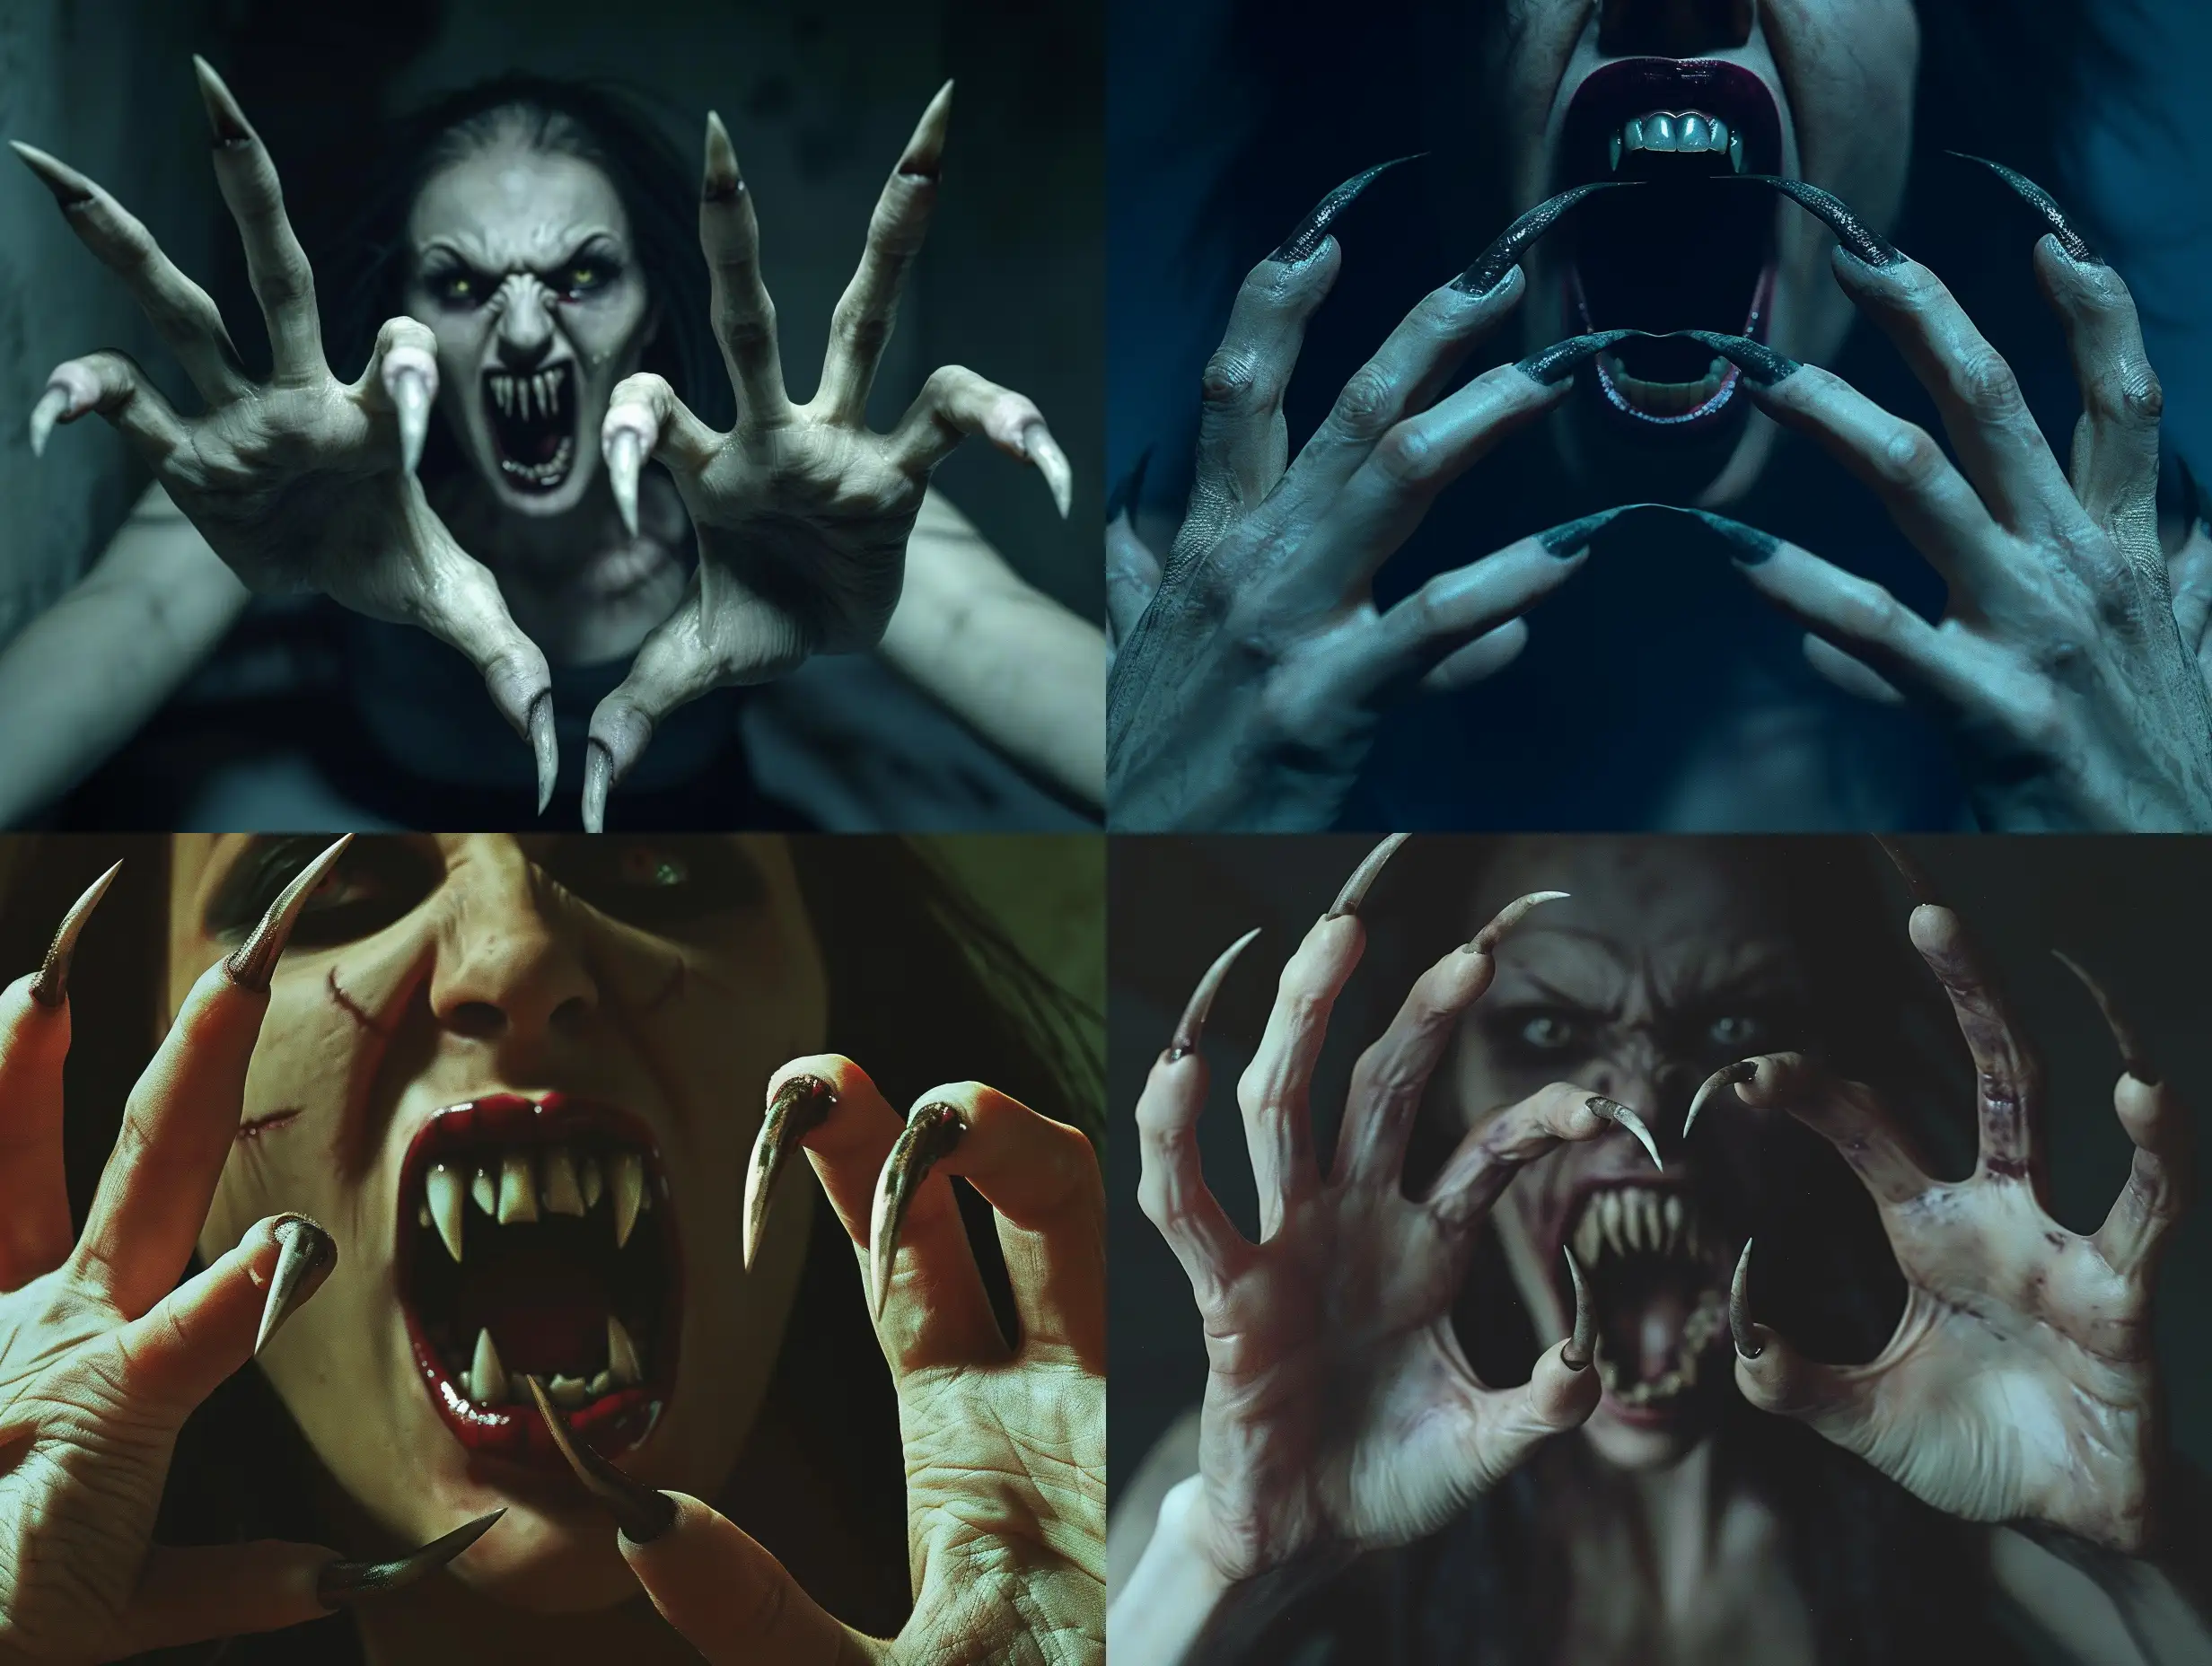 A photorealistic scene of a wild ugly monstruos vampire female with extra long pointed fingernails, on each hands with five fingers, her mouth is threateningly open, and terrible teeth look like fangs, the woman looks like she climbed out of the grave, her nails resemble the claws of a predators.scene inside darkness room,hyper-realism, cinematic, high detail, photo detailing, high quality, photorealistic, aggressive, dark atmosphere, realistic, the smallest details, detailed nails, atmospheric lighting, full anatomical, photorealism, detailed, textured, dark, haunting, night-time scene, intense, creepy, undead, spooky, eerie, atmospheric lighting, nightmare, grotesque, terrifying, realistic anatomy, human hands, very clear without flaws with five fingers.